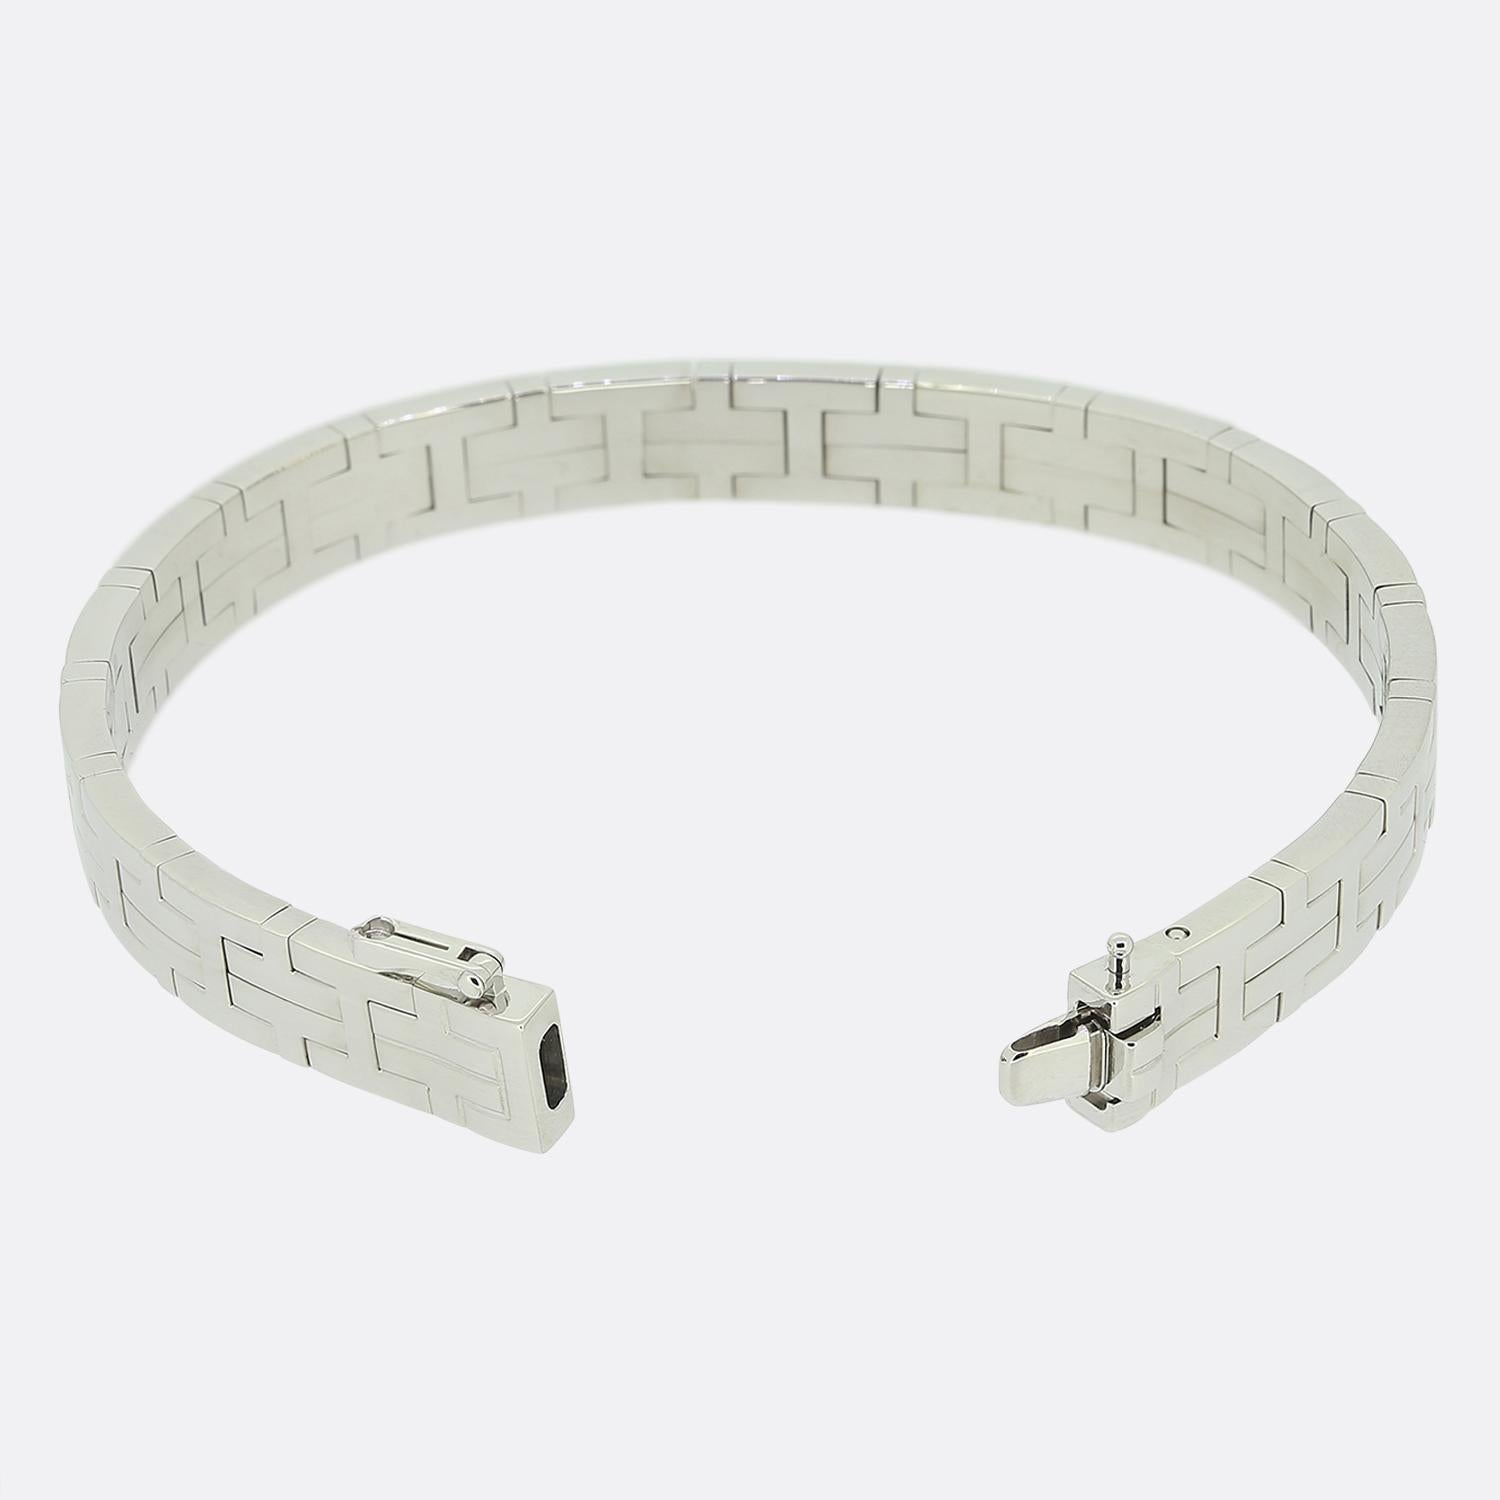 Here we have an elegant 18ct white gold bangle from the world renowned luxury designer, Hermès. This piece forms part of their 'Kilim' collection and is composed of interlocking embedded 